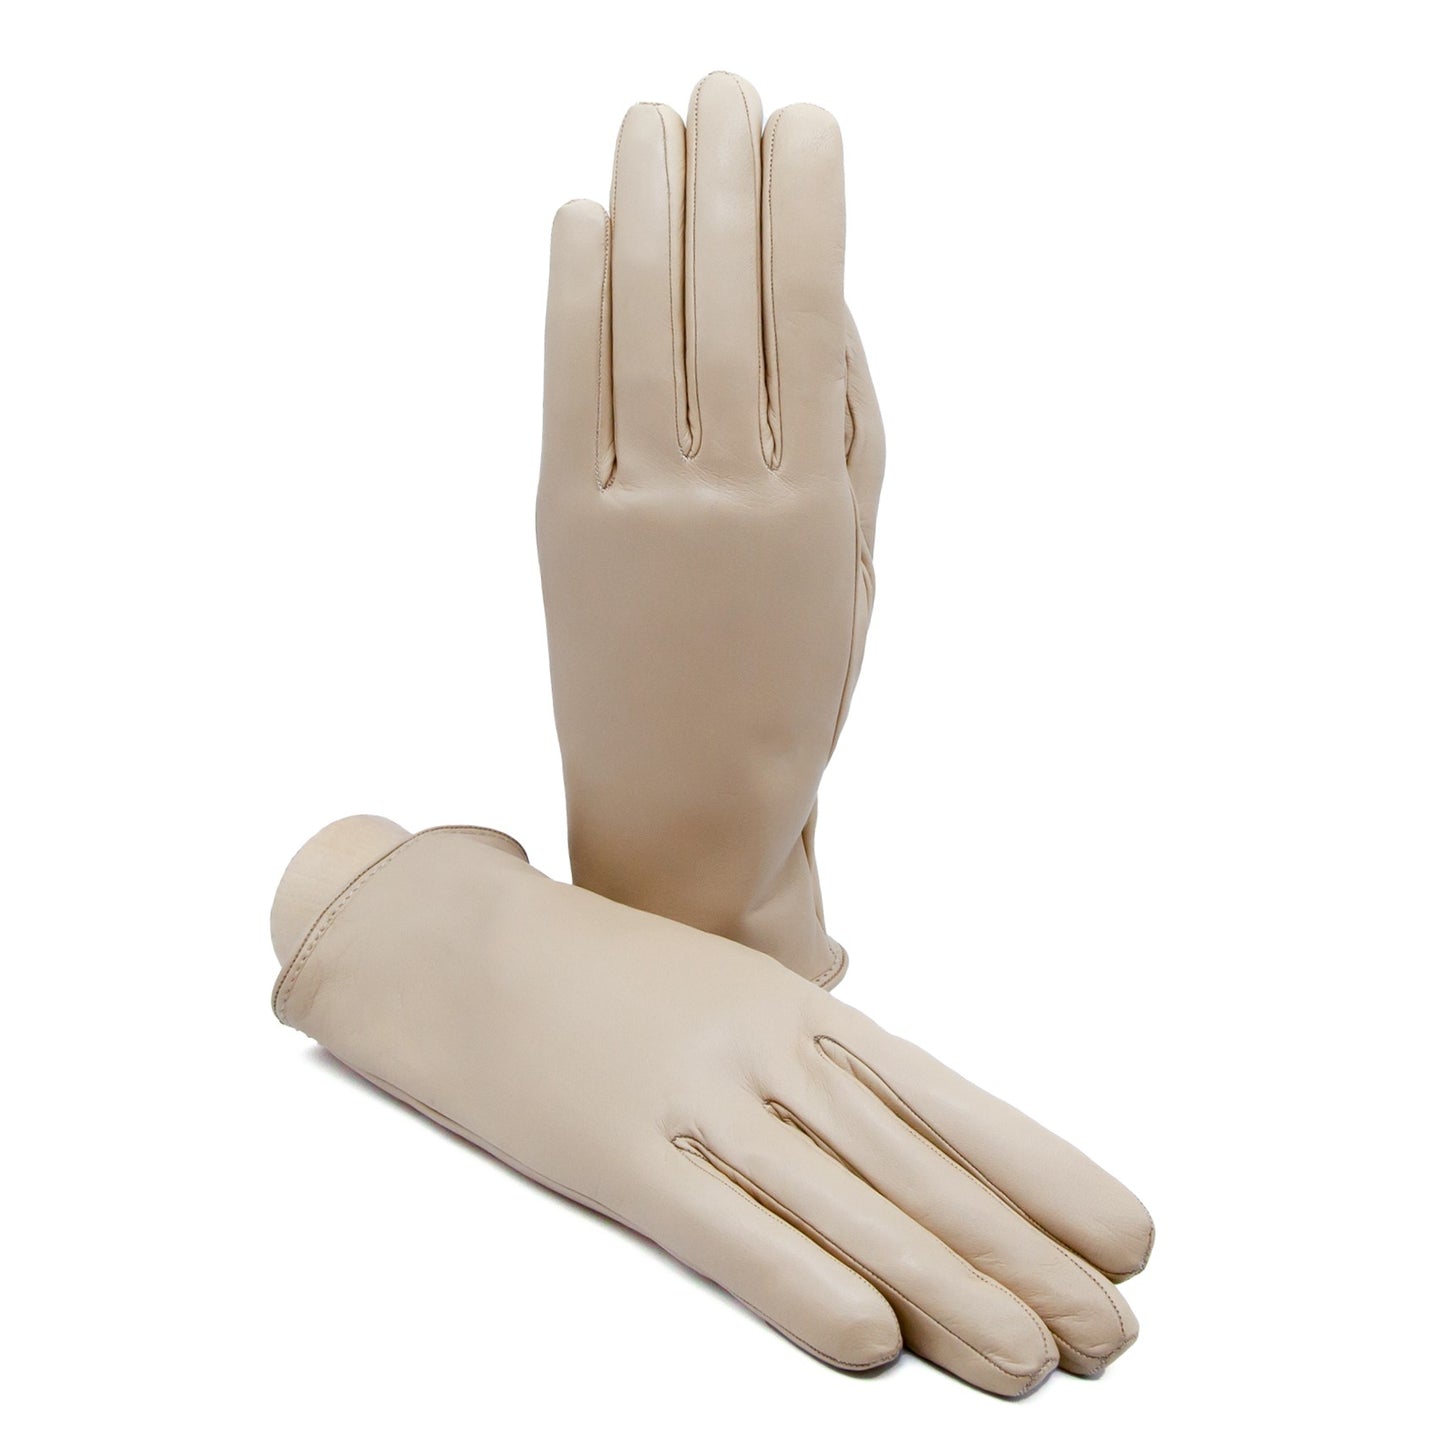 Women’s basic beige soft nappa leather gloves with palm opening and mix cashmere lining